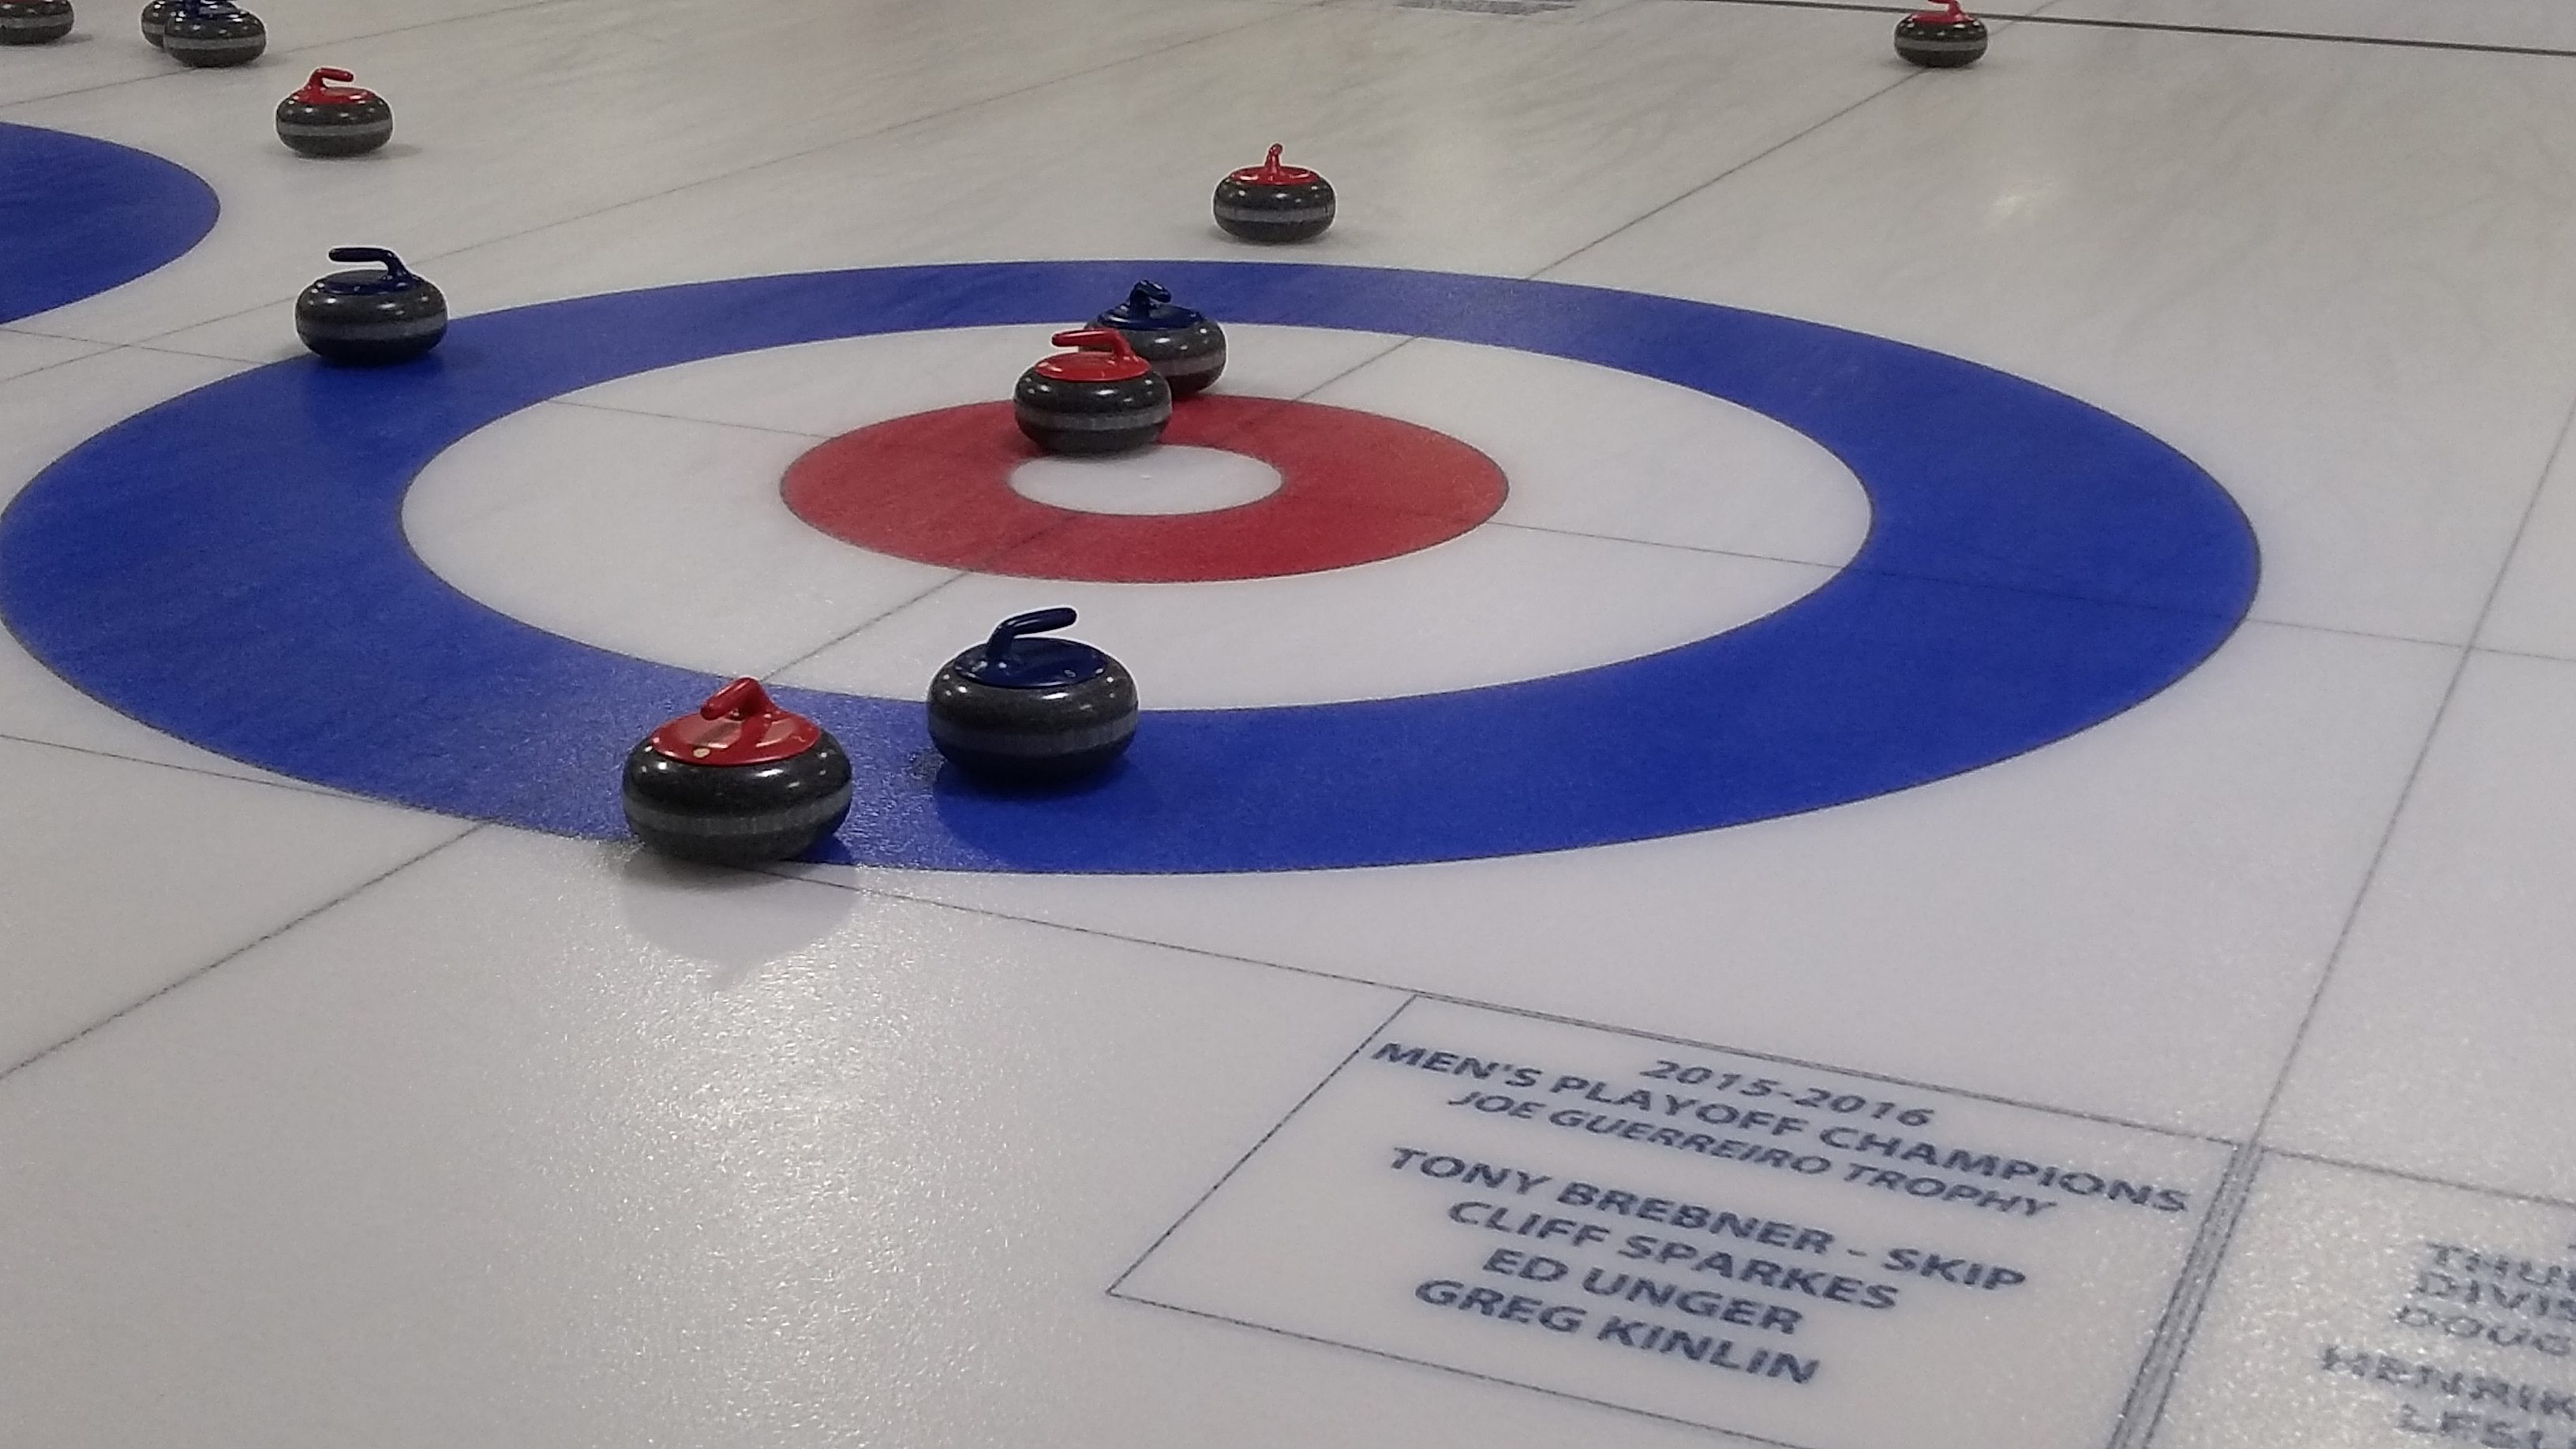 Curling rink with red and blue curling stones.